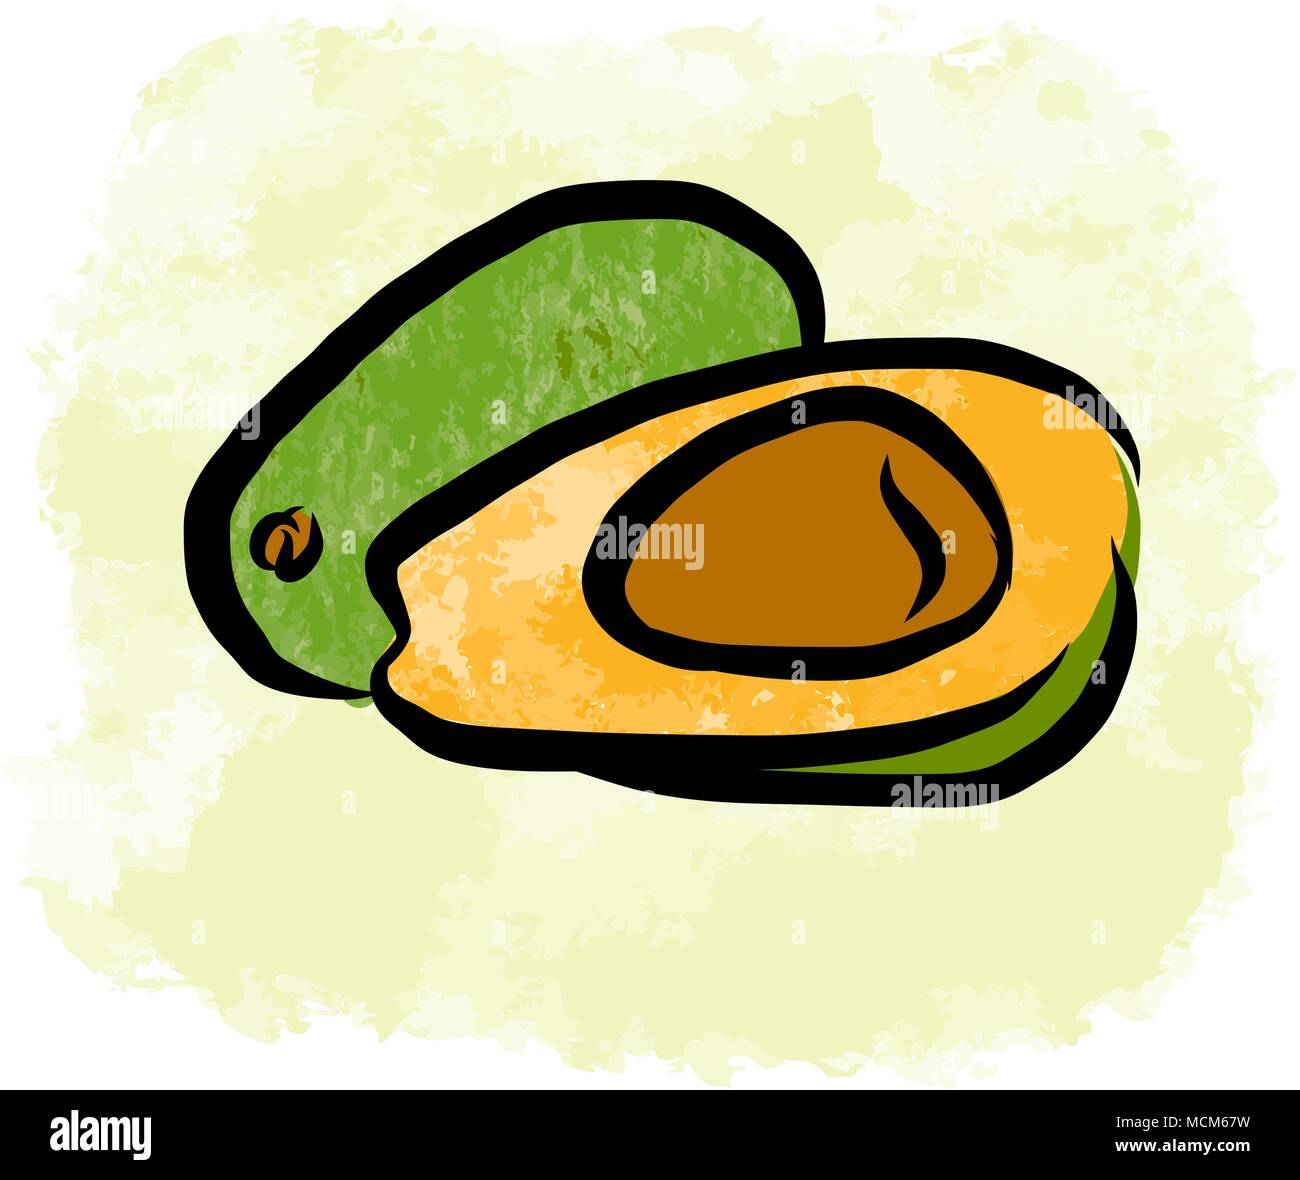 Colored drawing of avocados. Fresh design of colorful fruits made in watercolor style. Modern marketing illustration on white background. Stock Vector